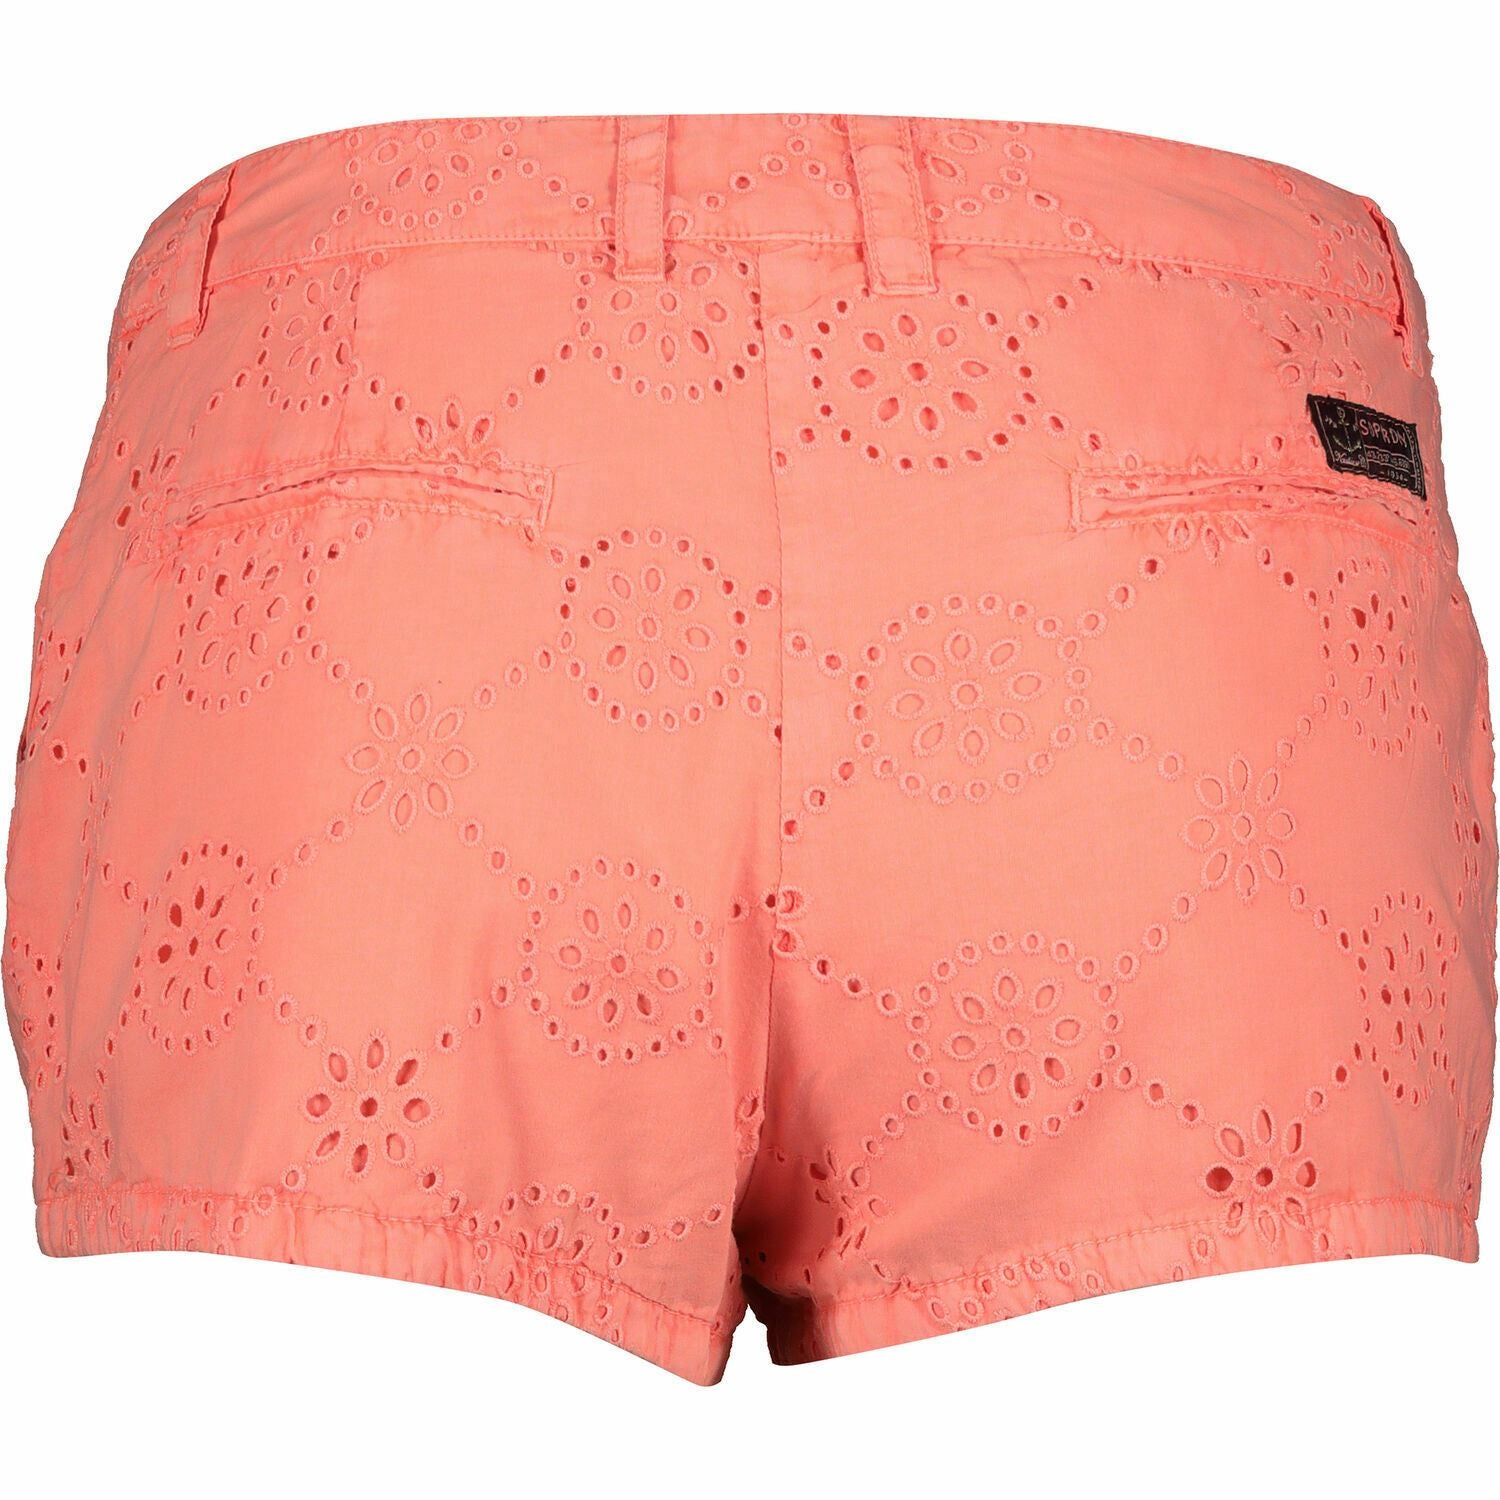 SUPERDRY Women's BRODERIE Chino Shorts, Fluro Coral, size XS - UK 8